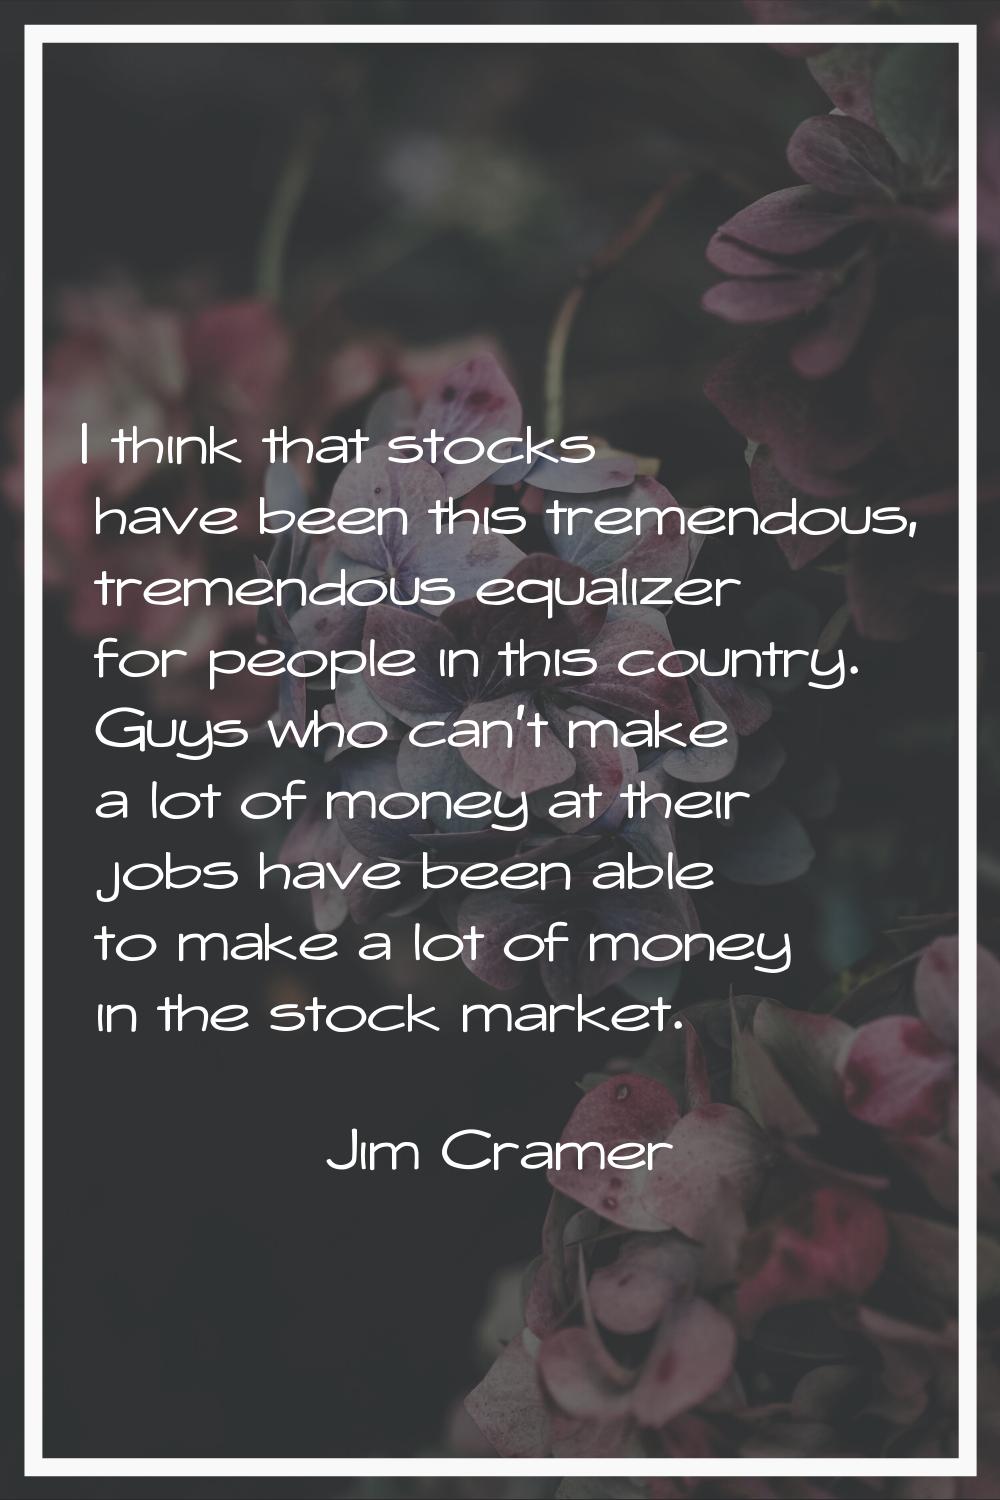 I think that stocks have been this tremendous, tremendous equalizer for people in this country. Guy